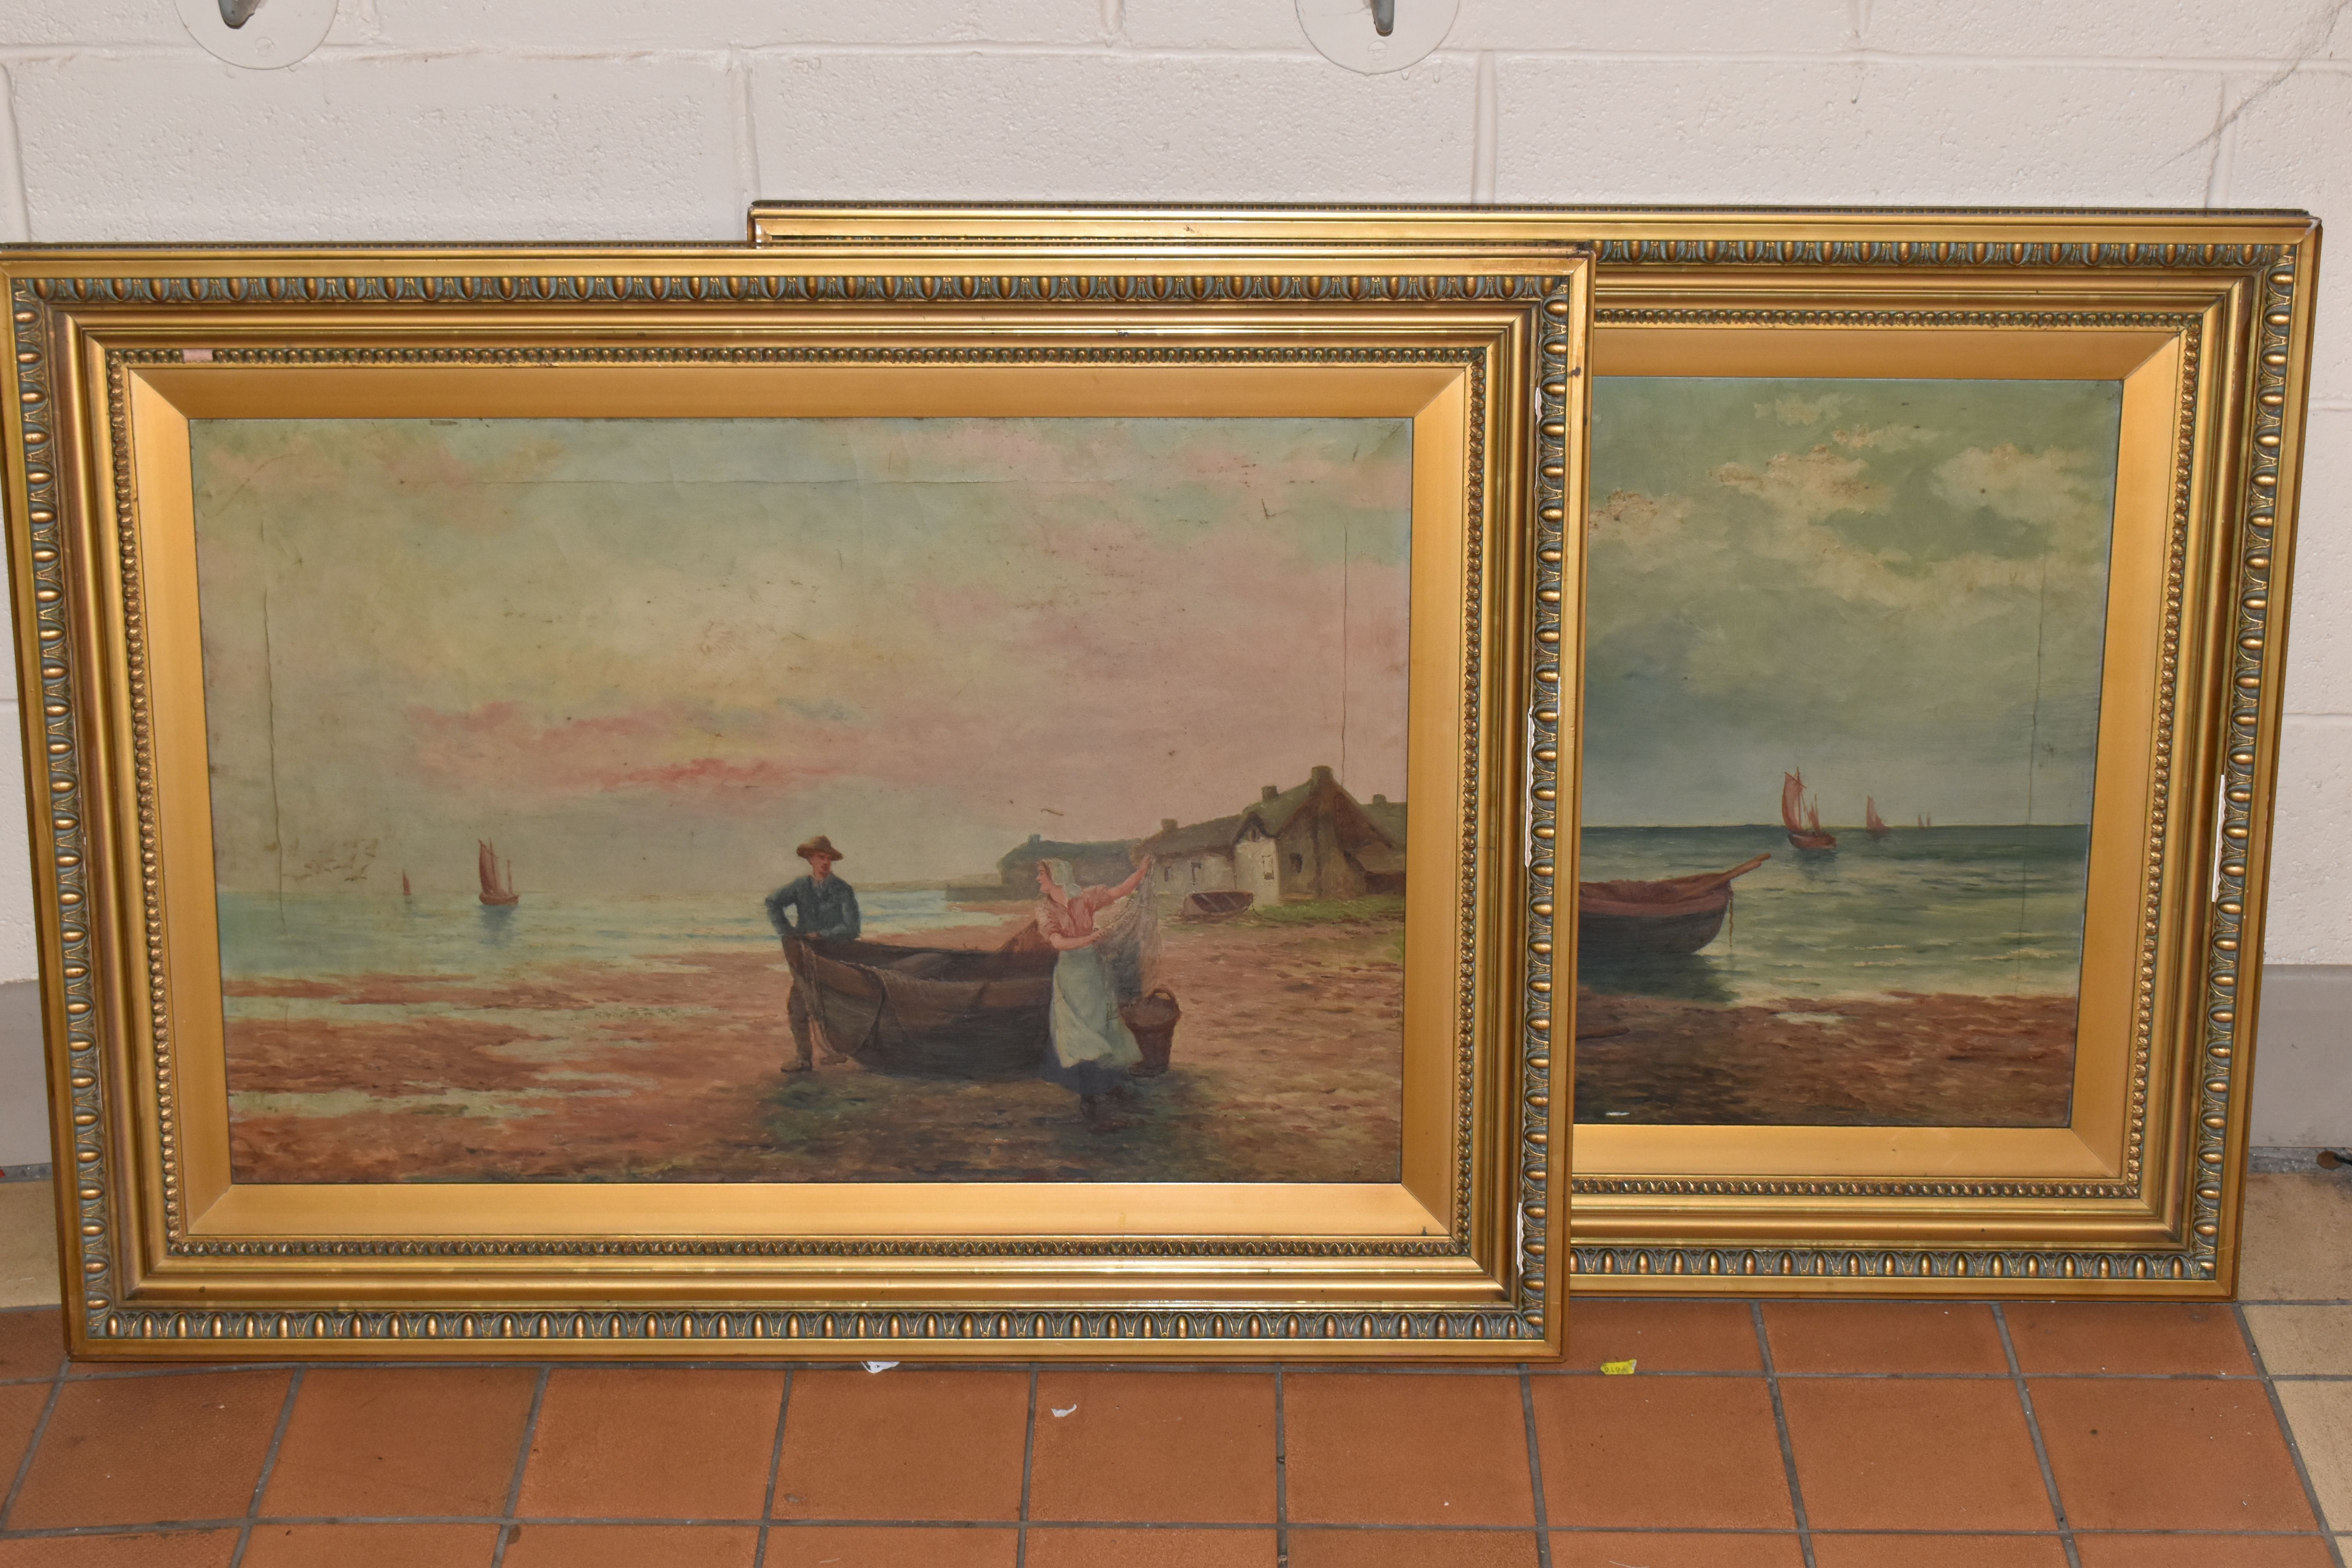 TWO UNSIGNED EARLY 20TH CENTURY COASTAL LANDSCAPES, the first depicts three figures on a beach